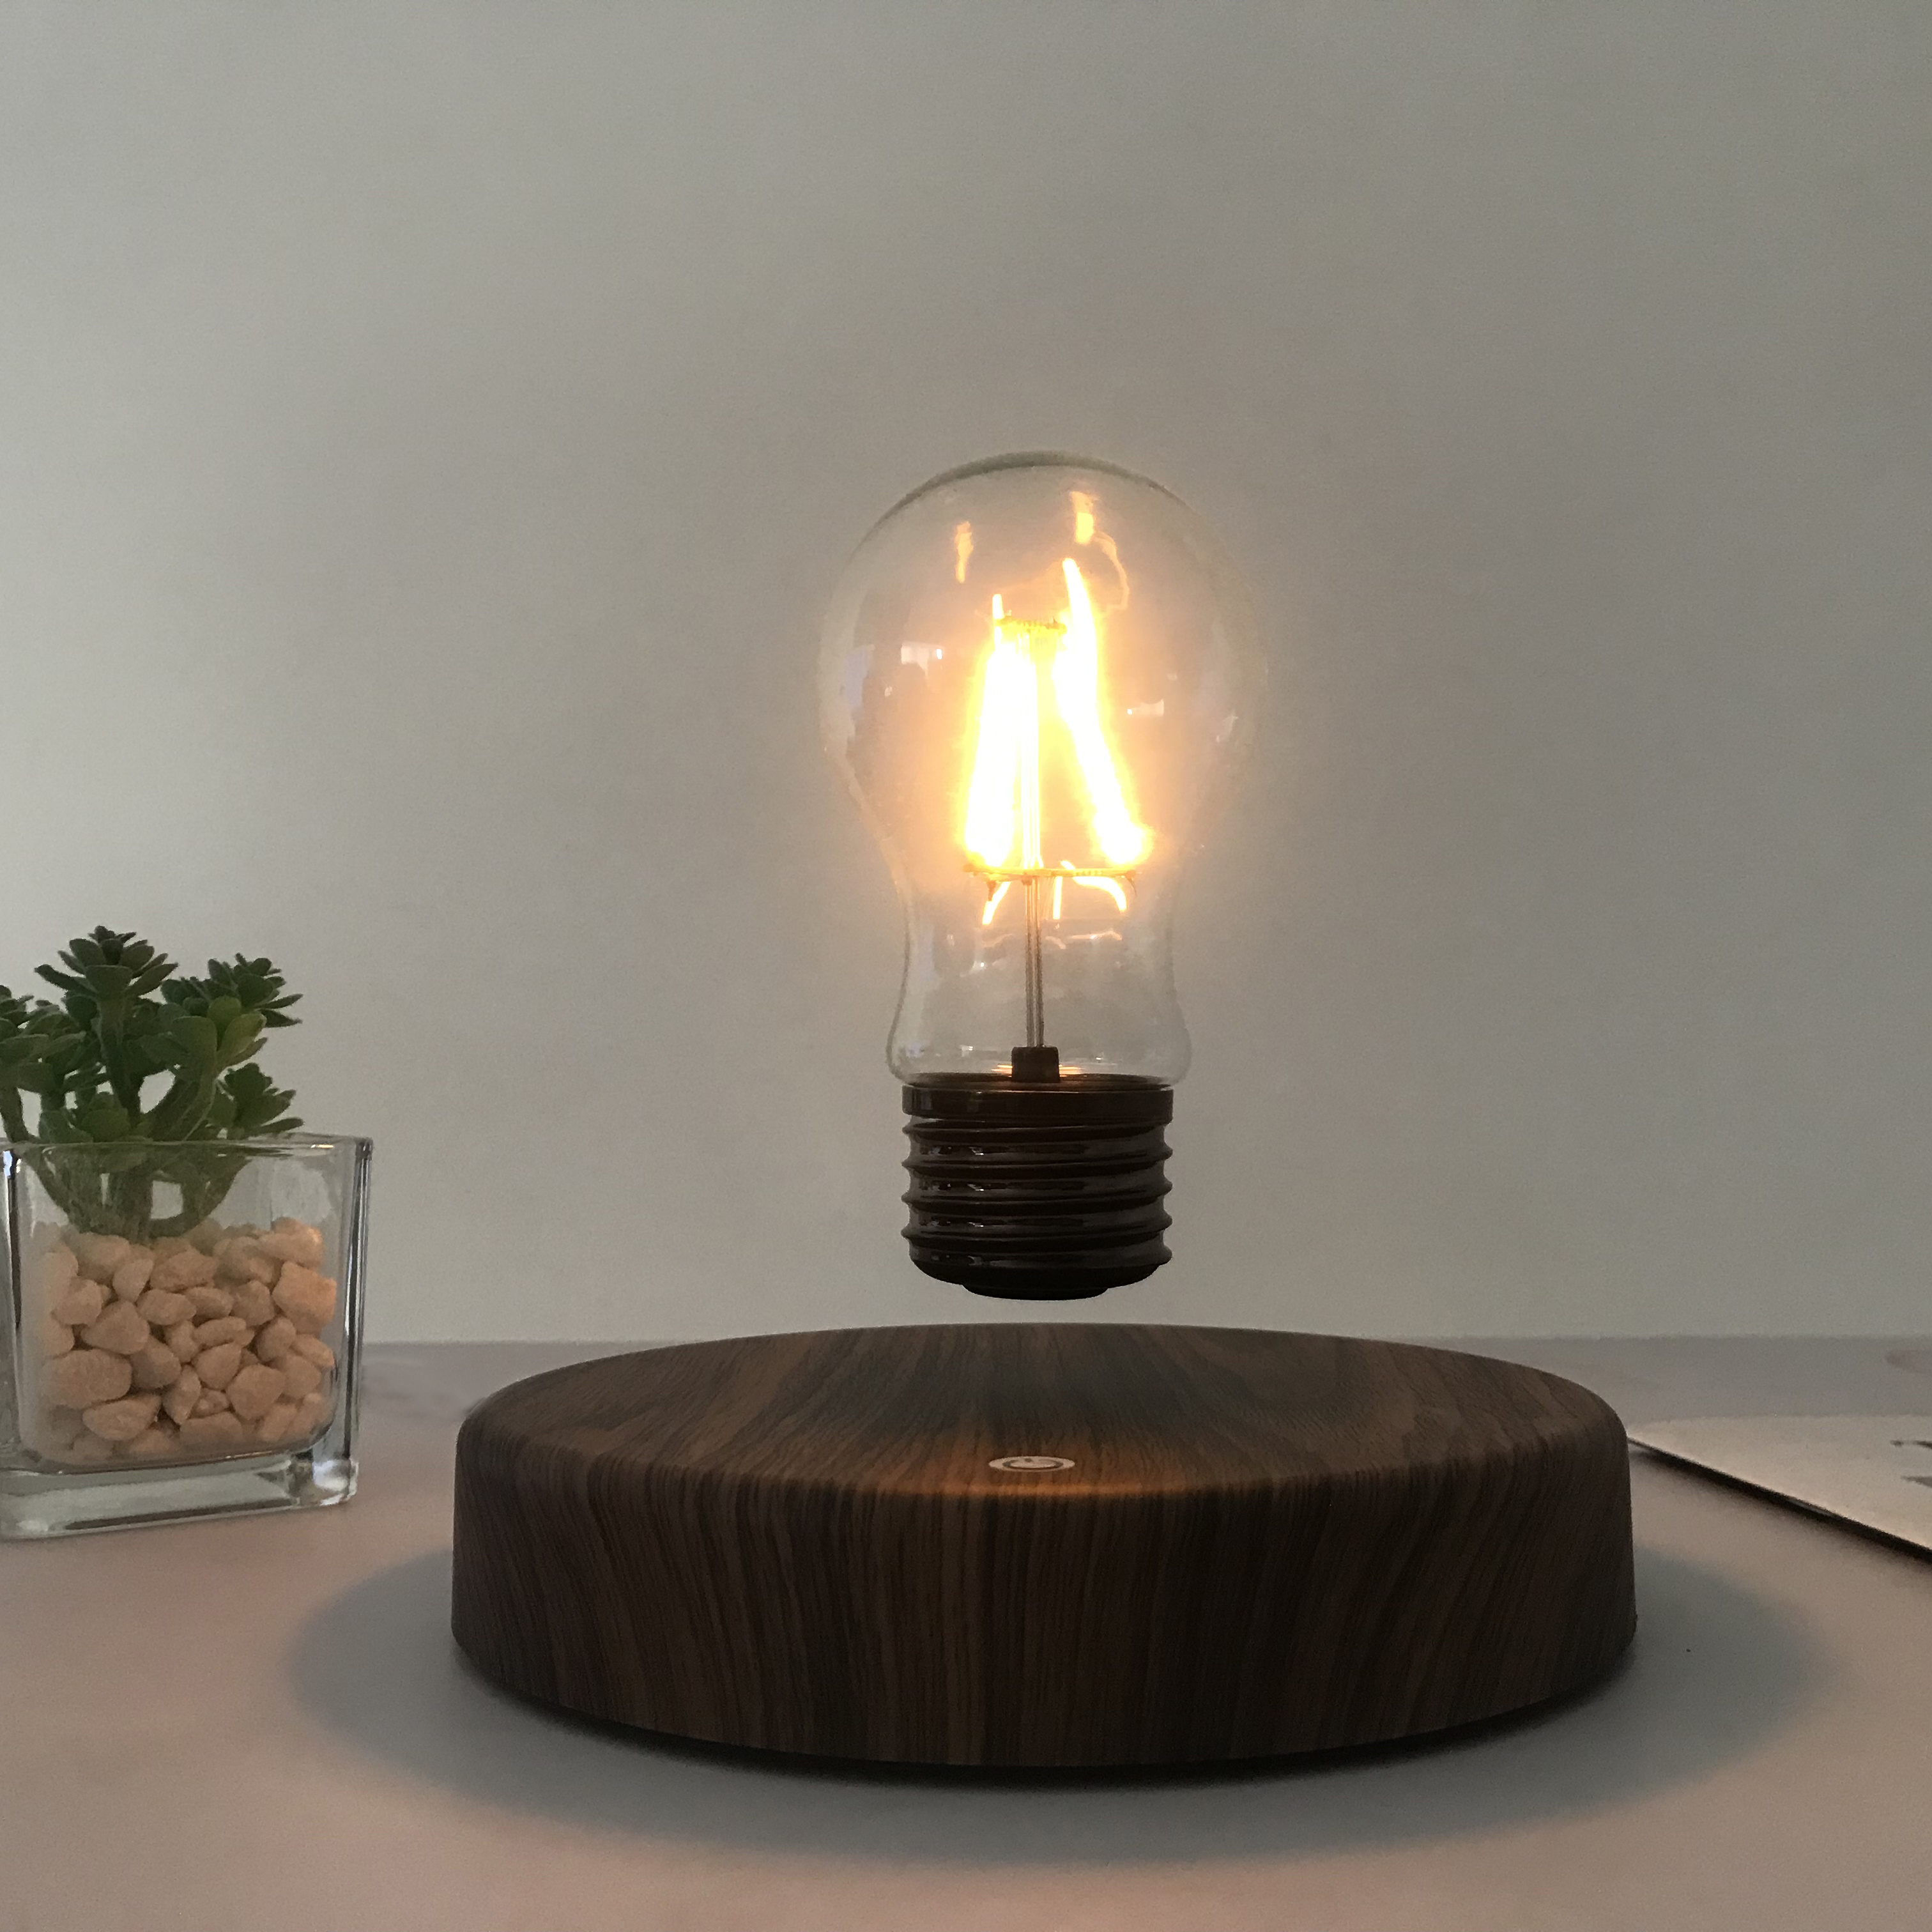 Levitating LED Desk Lamp - Add A Touch Of Magic To Your Home Decor!